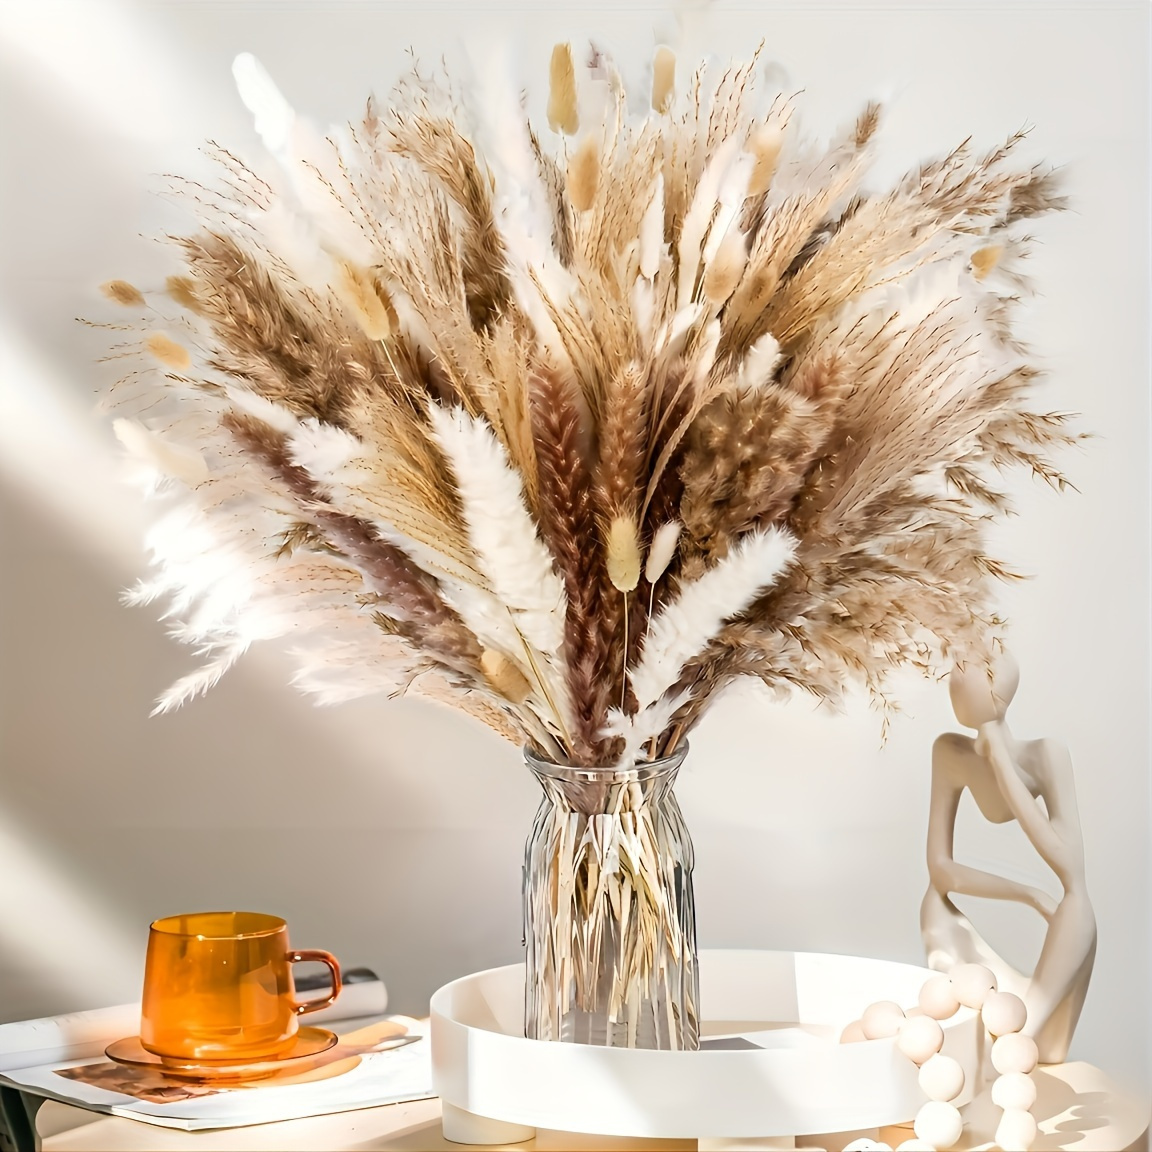 

150-piece Boho Chic Dried Flower Bundle - Pampas Grass, Bunny Tails & Reed Bouquet For Weddings And Home Decor